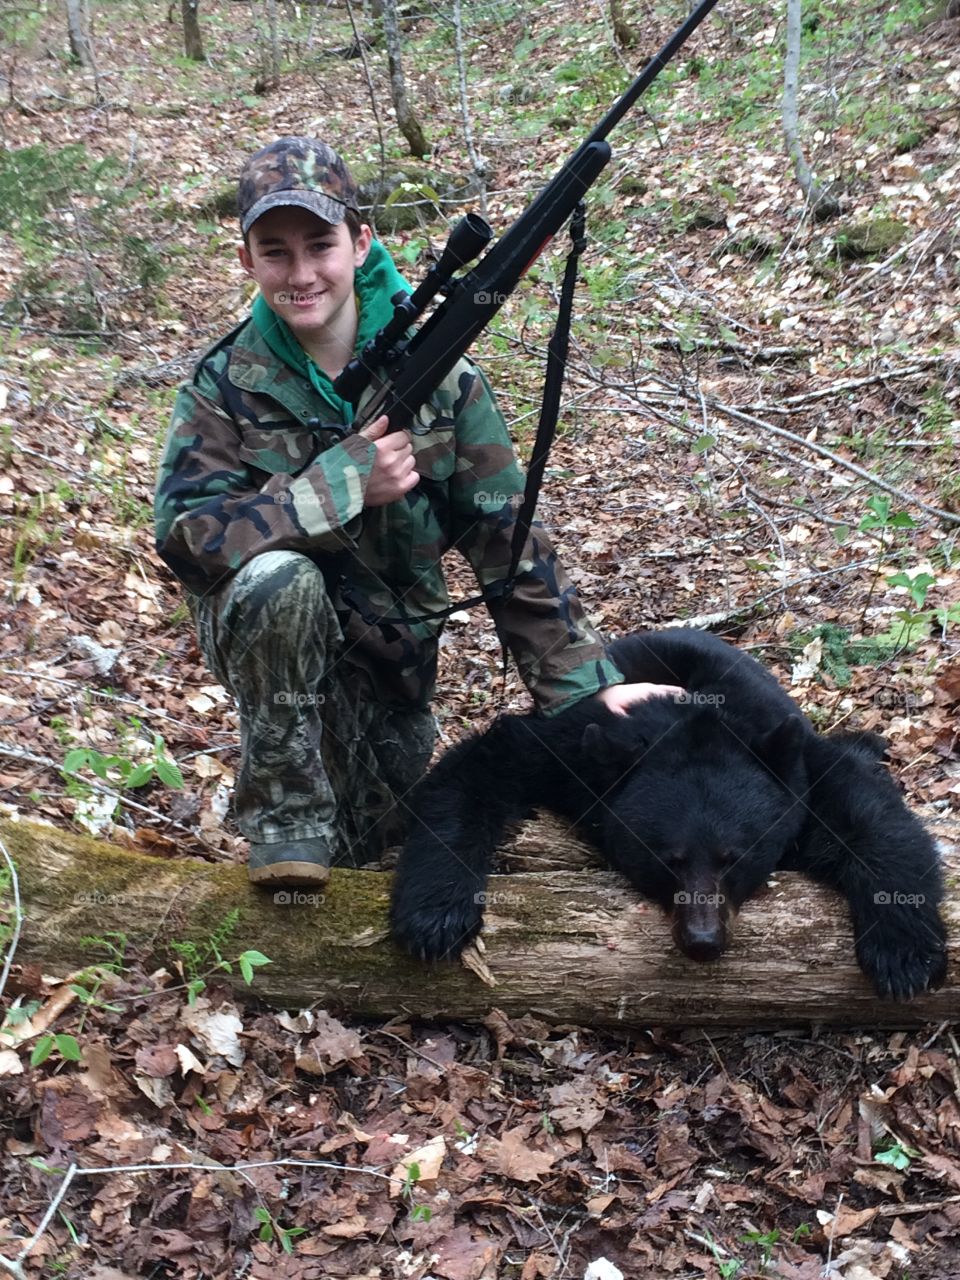 My son with our trophy black bear hunt